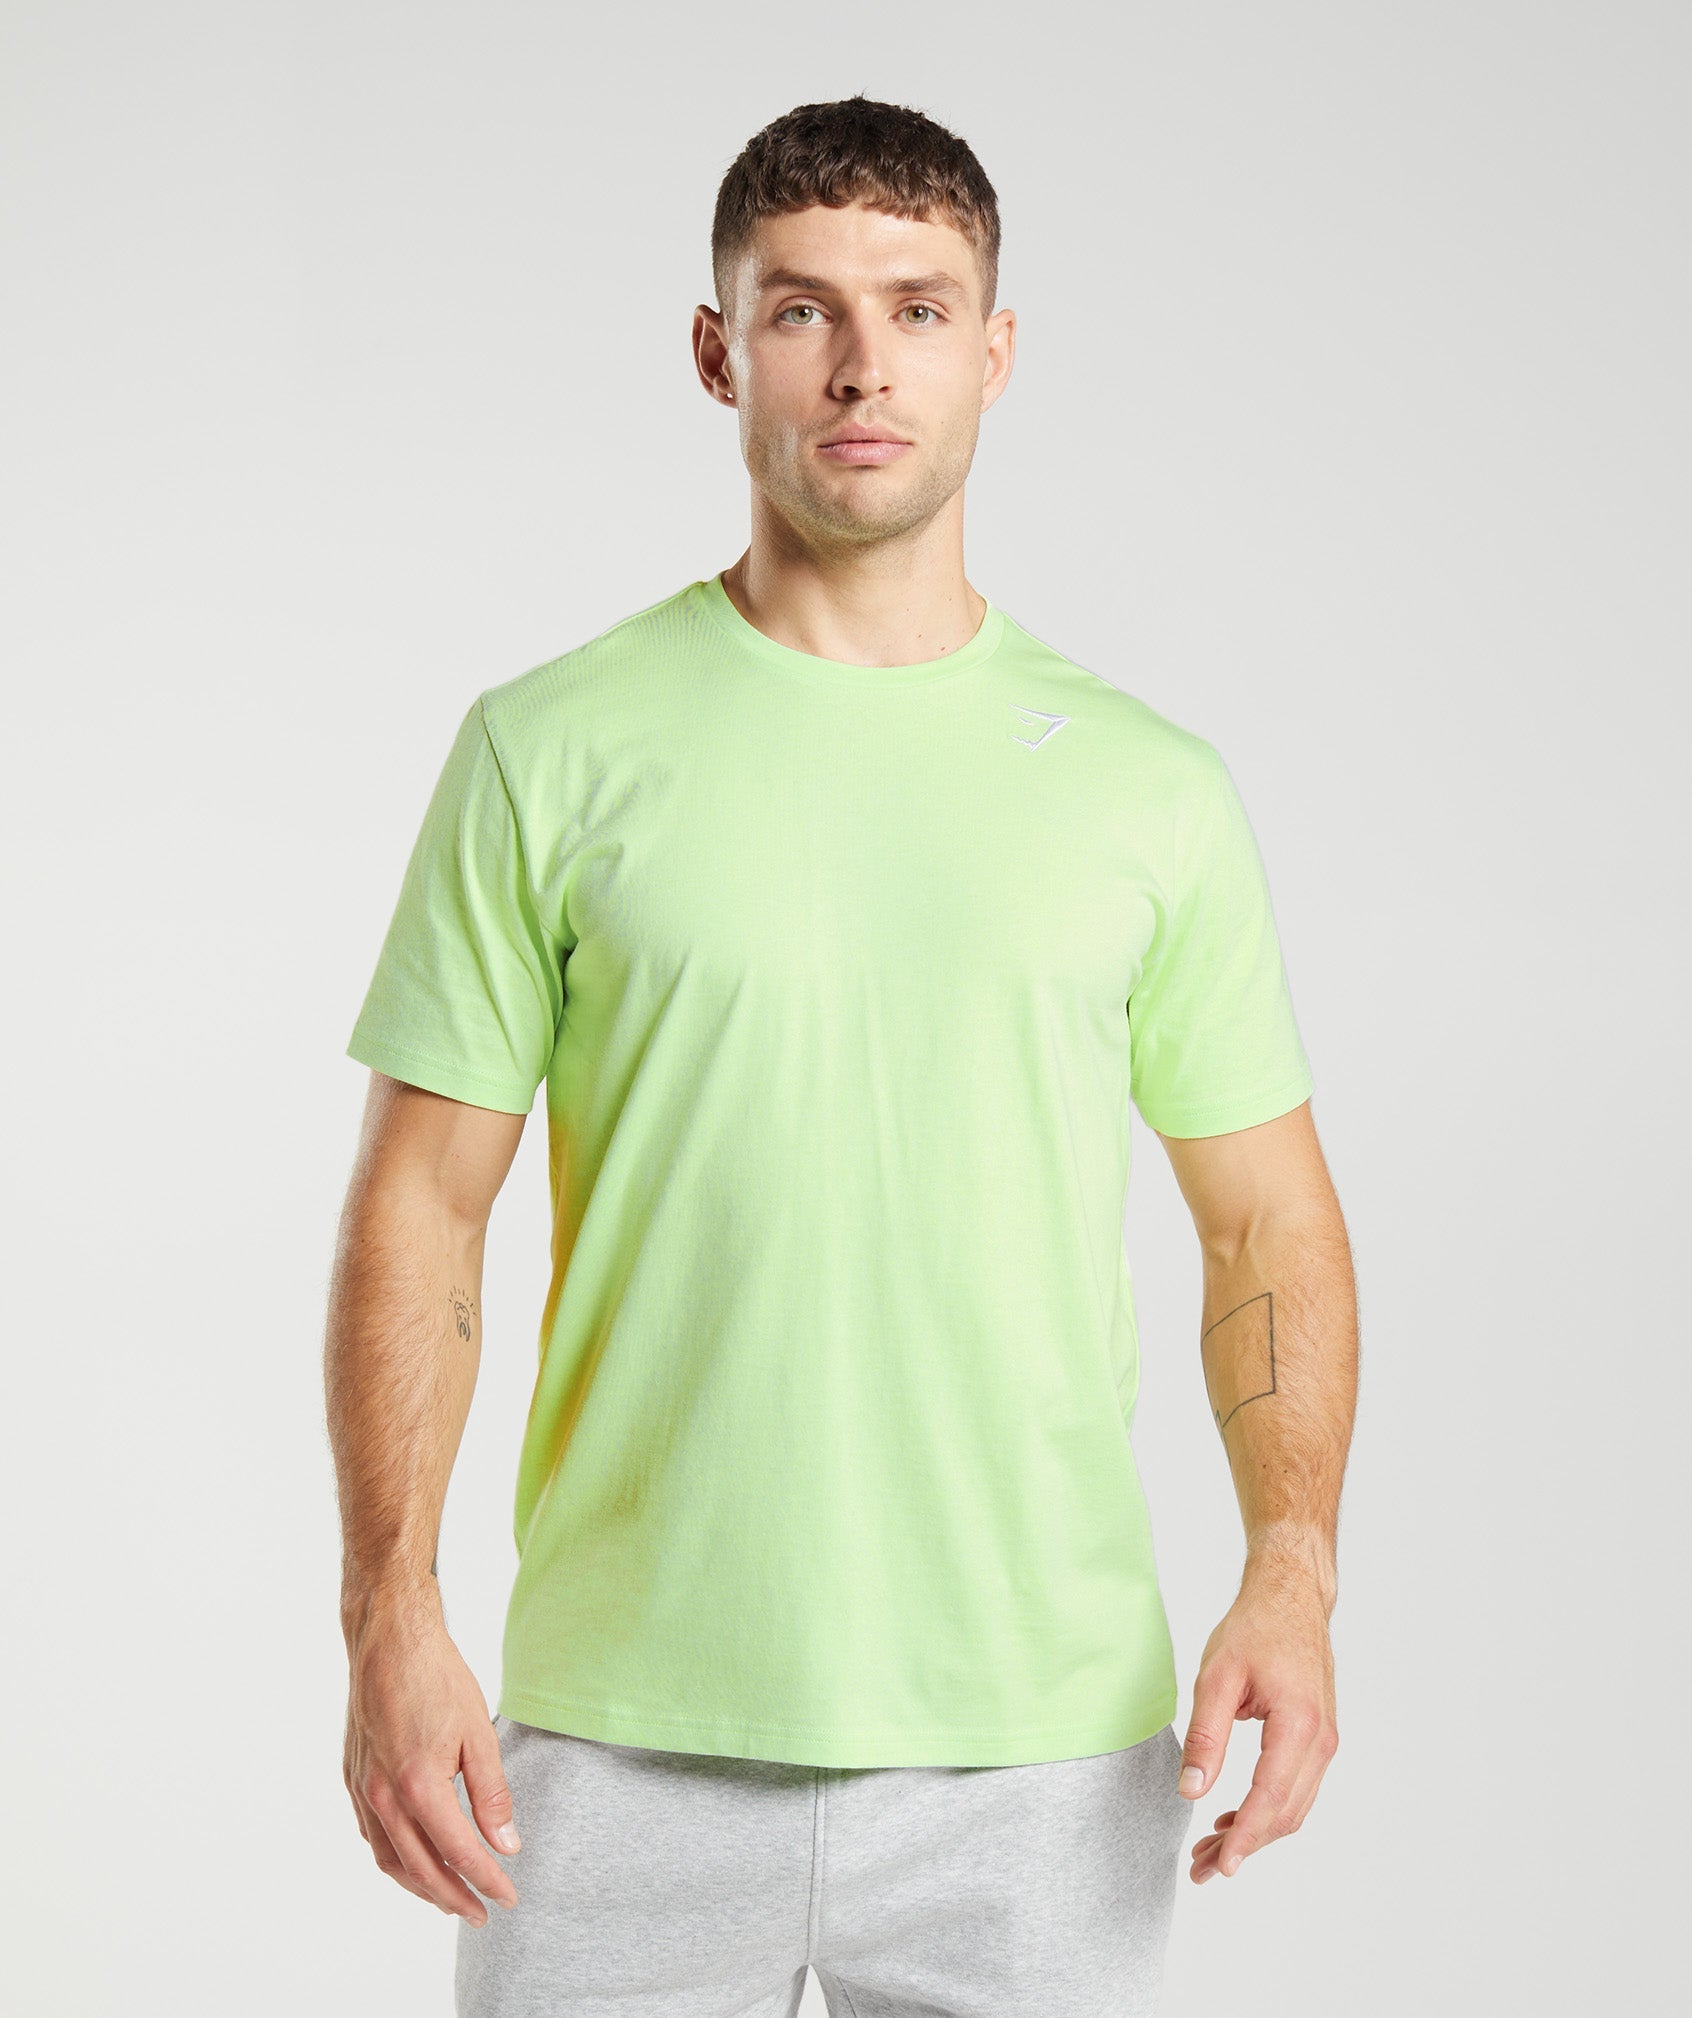 Crest T-Shirt in Kiwi Green - view 1